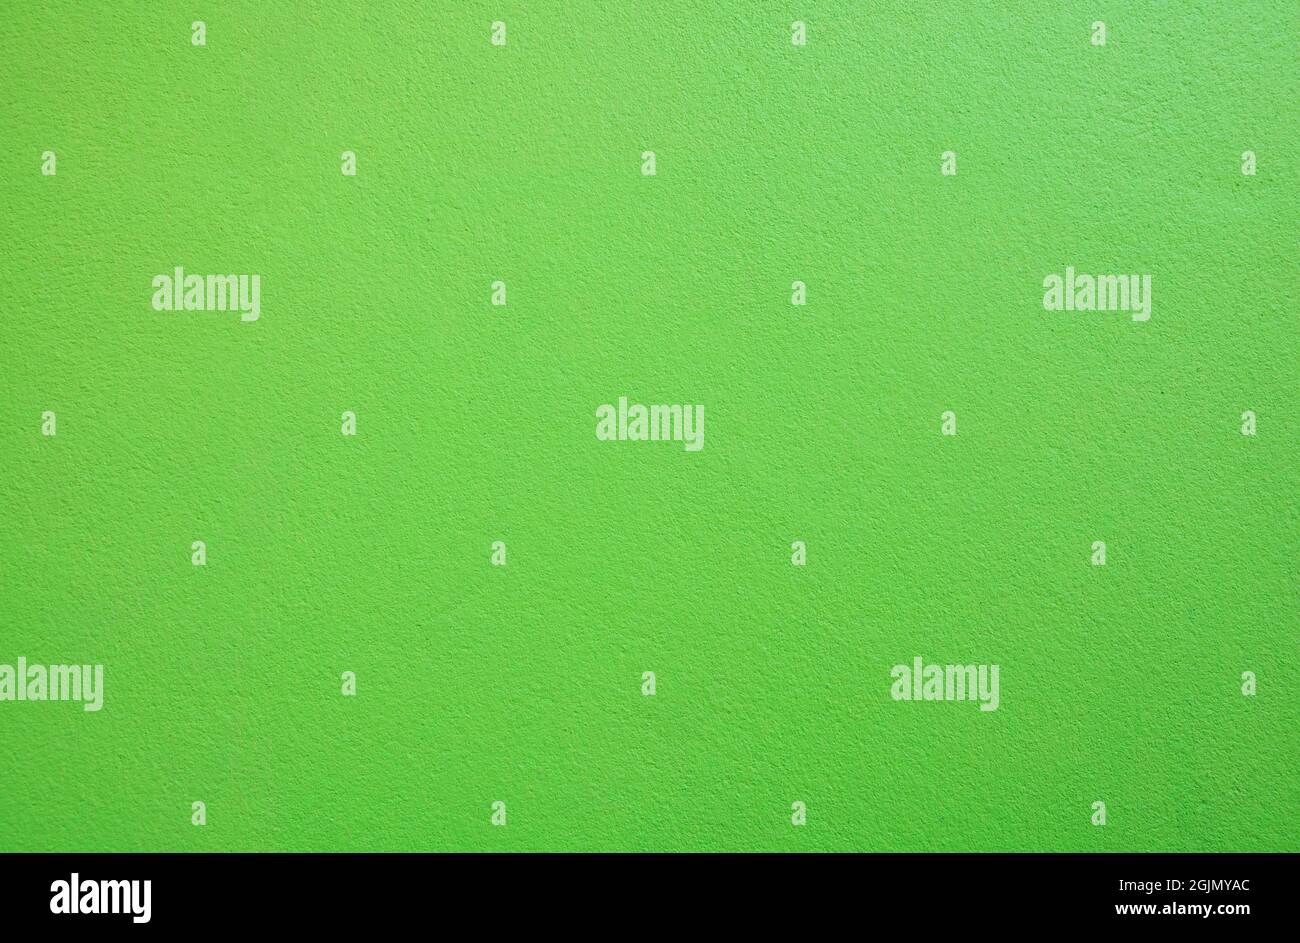 Green lime or chartreuse concrete wall texture background, For abstract background uses Stock Photo